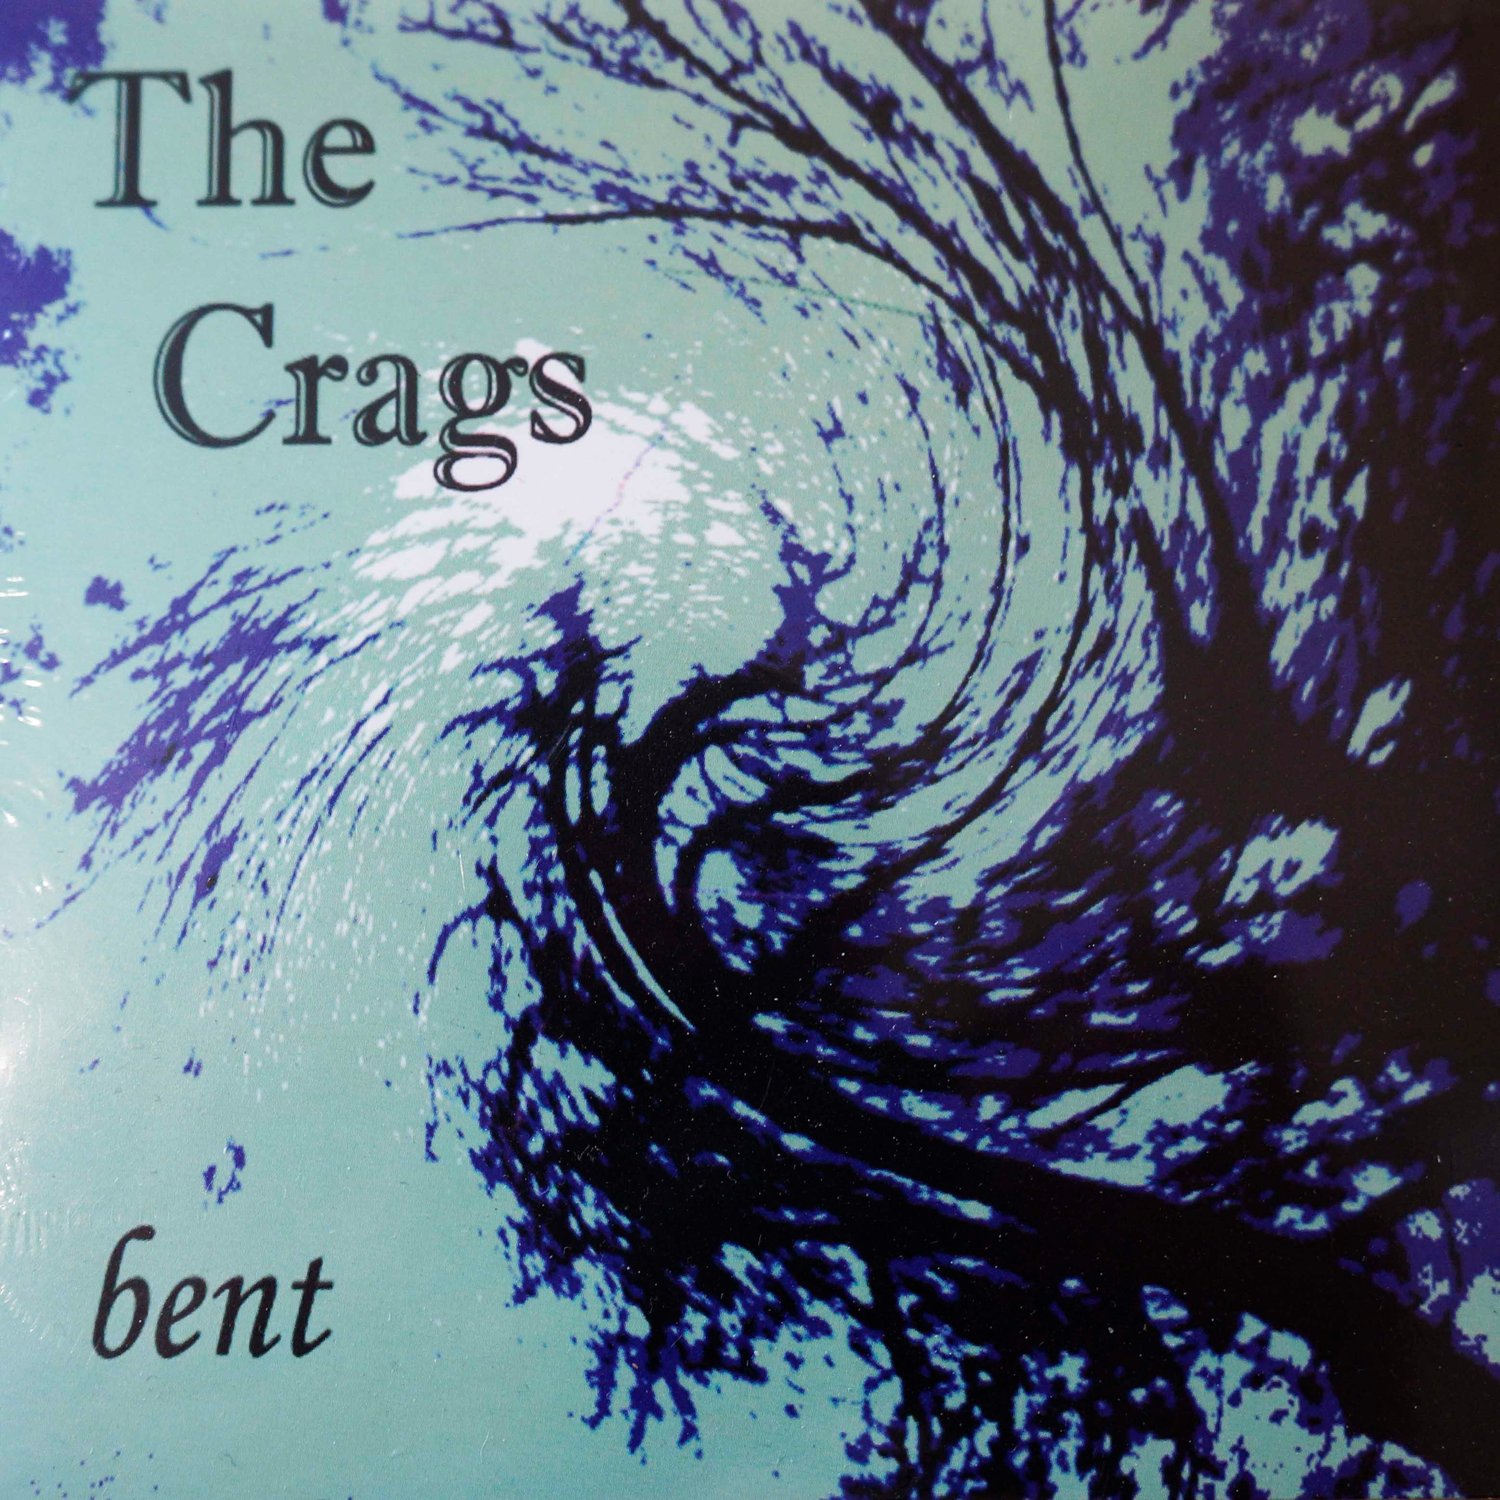 "Bent" by The Crags